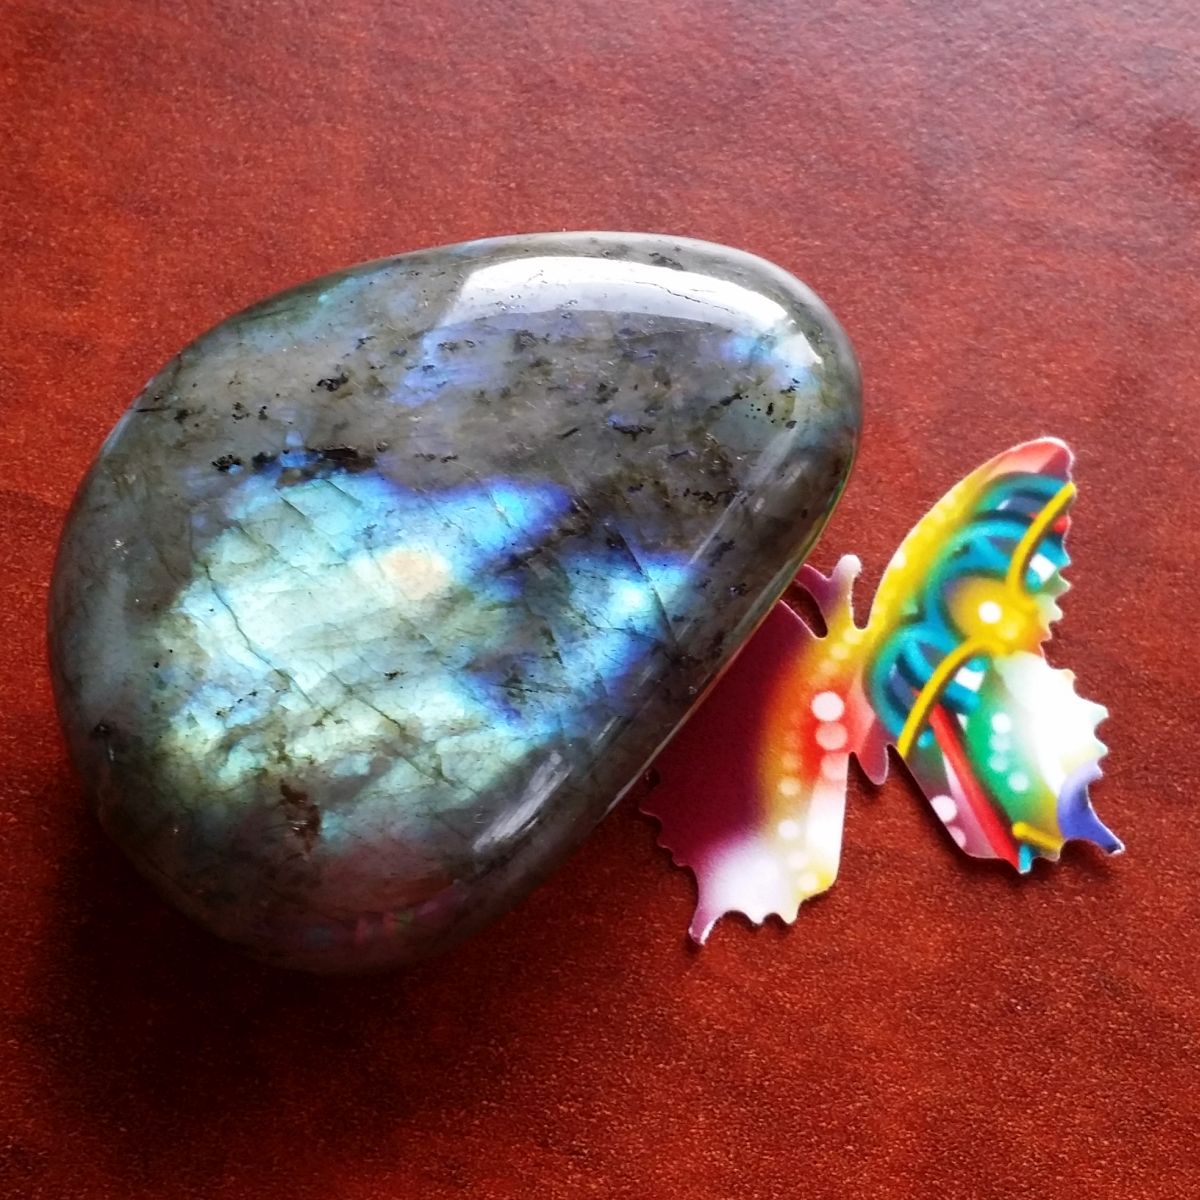 A butterfly soaks up the essence of labradorite in a Rock The Butterfly Essence Session.